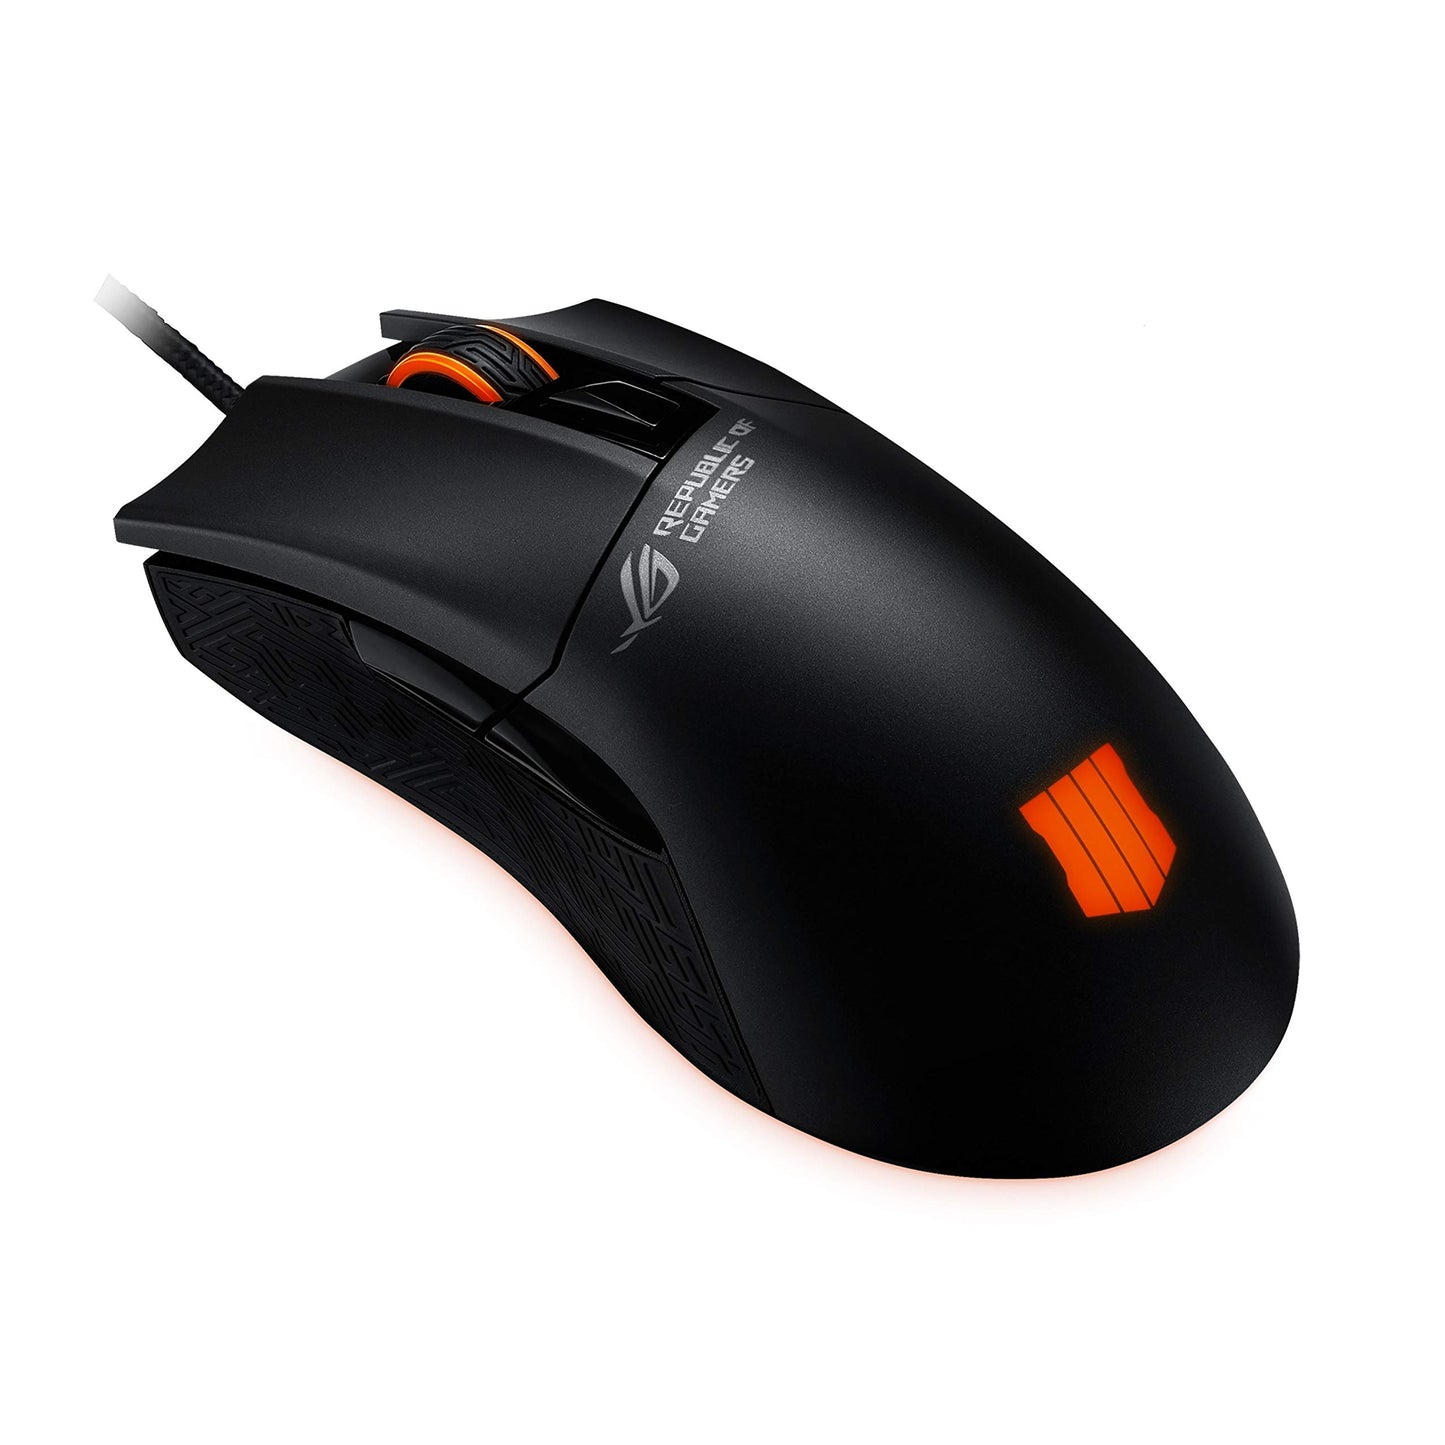 ASUS Rog Strix Carry Wireless and Bluetooth, 7200 Dpi Sensor, Optical Gaming Mouse